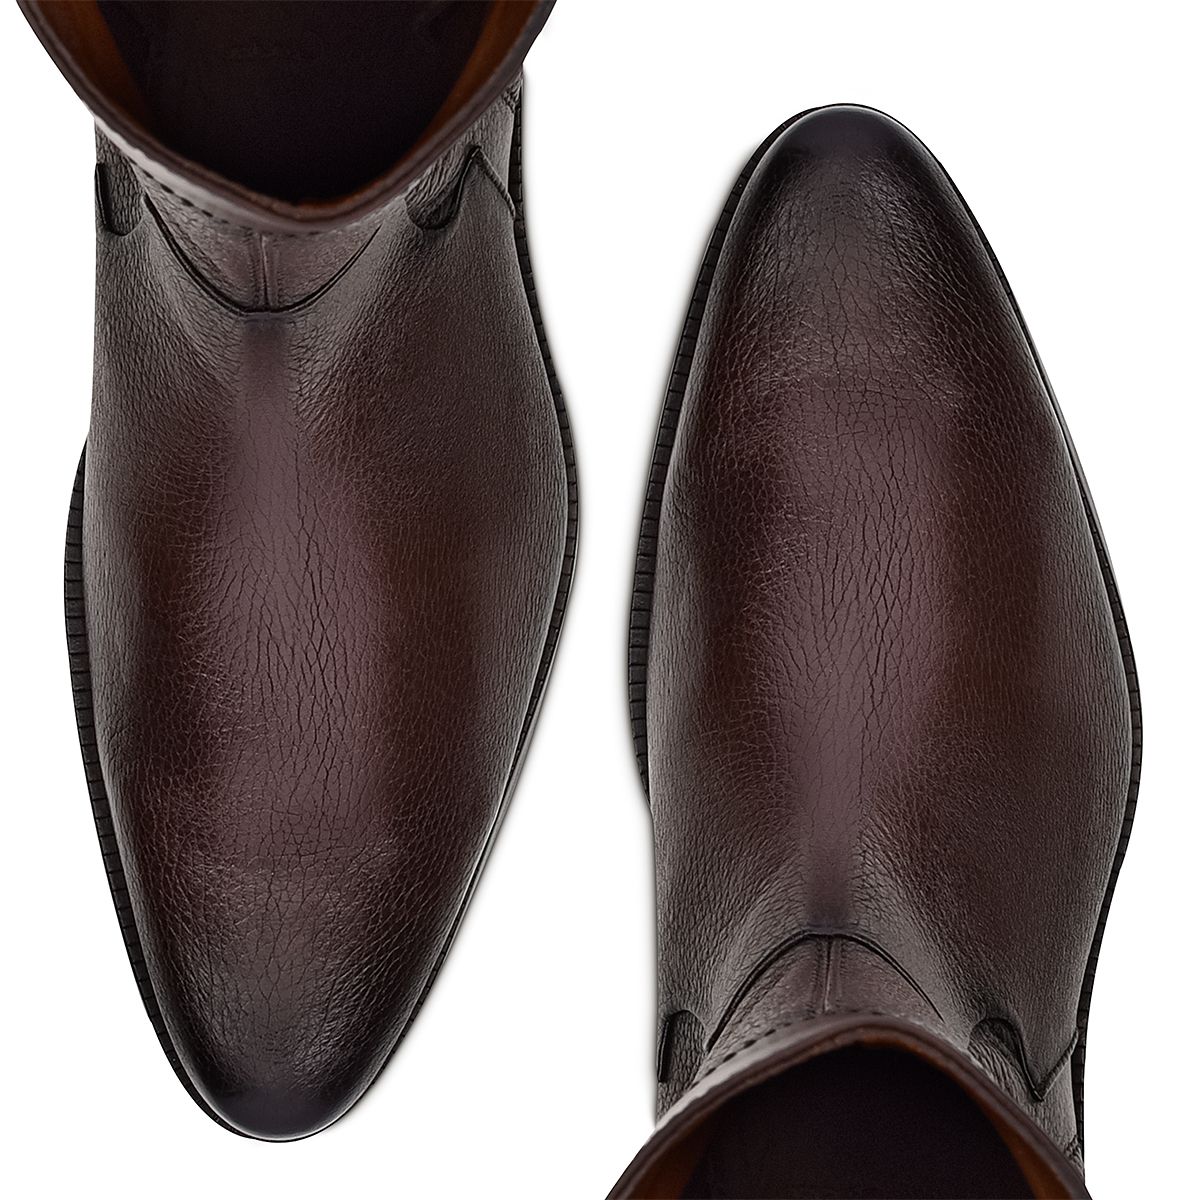 802VNBS - Cuadra brown dress casual deer leather ankle boots for men-FRANCO CUADRA-Kuet-Cuadra-Boots